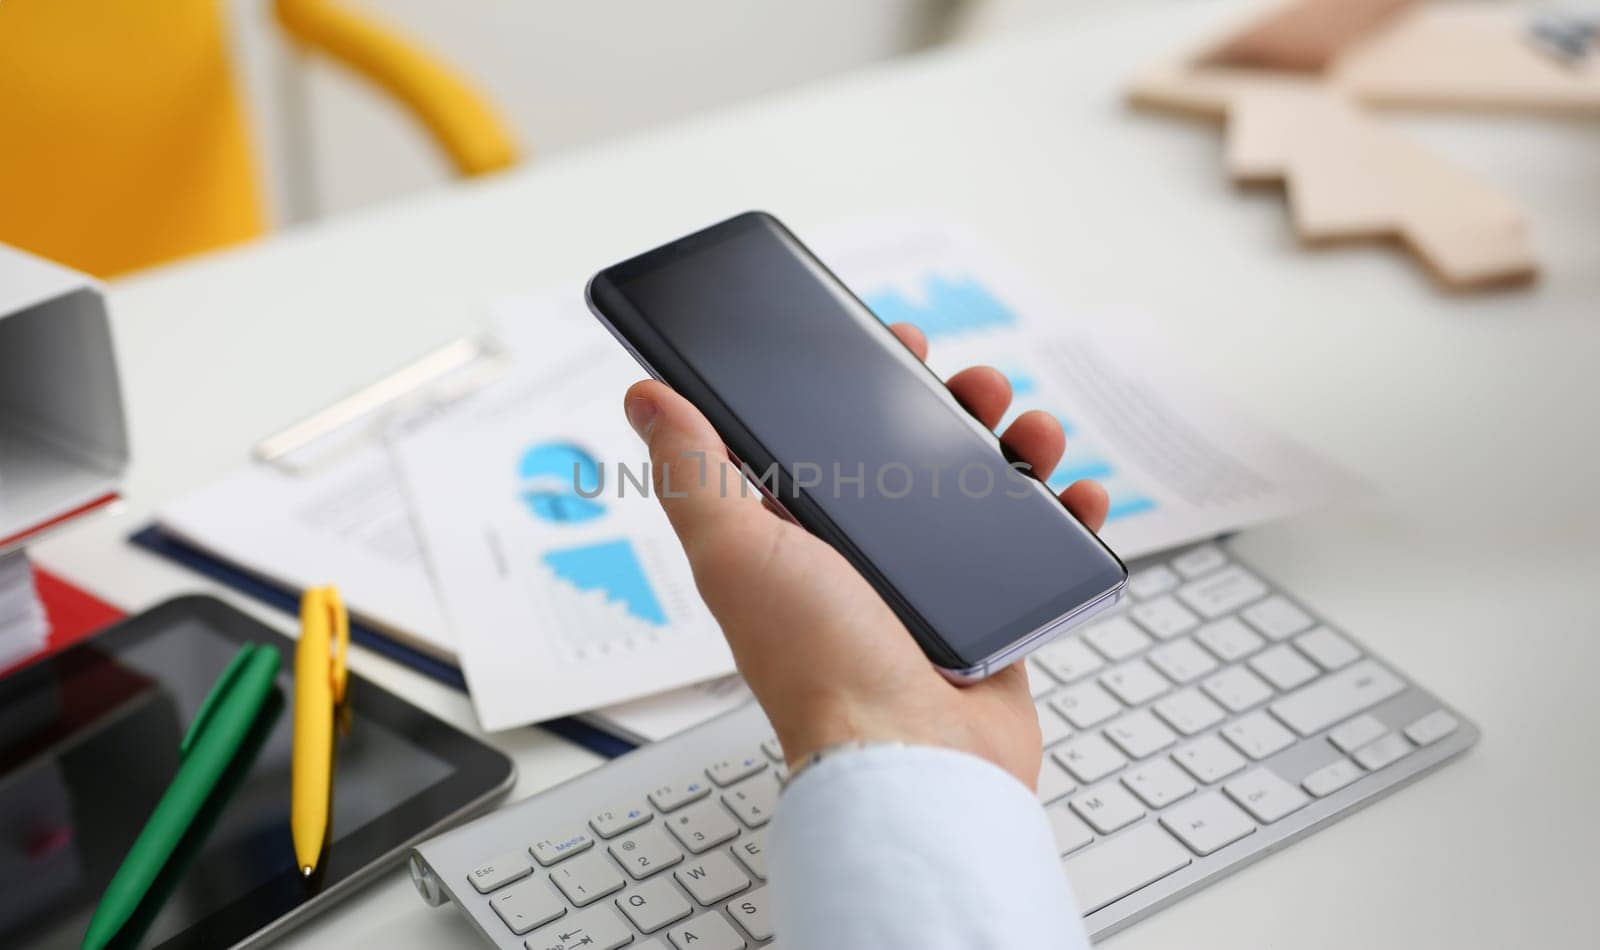 A businessman holds a new smartphone in his hand The mobile application market shows a display you can insert your image for advertising or financial statistics.